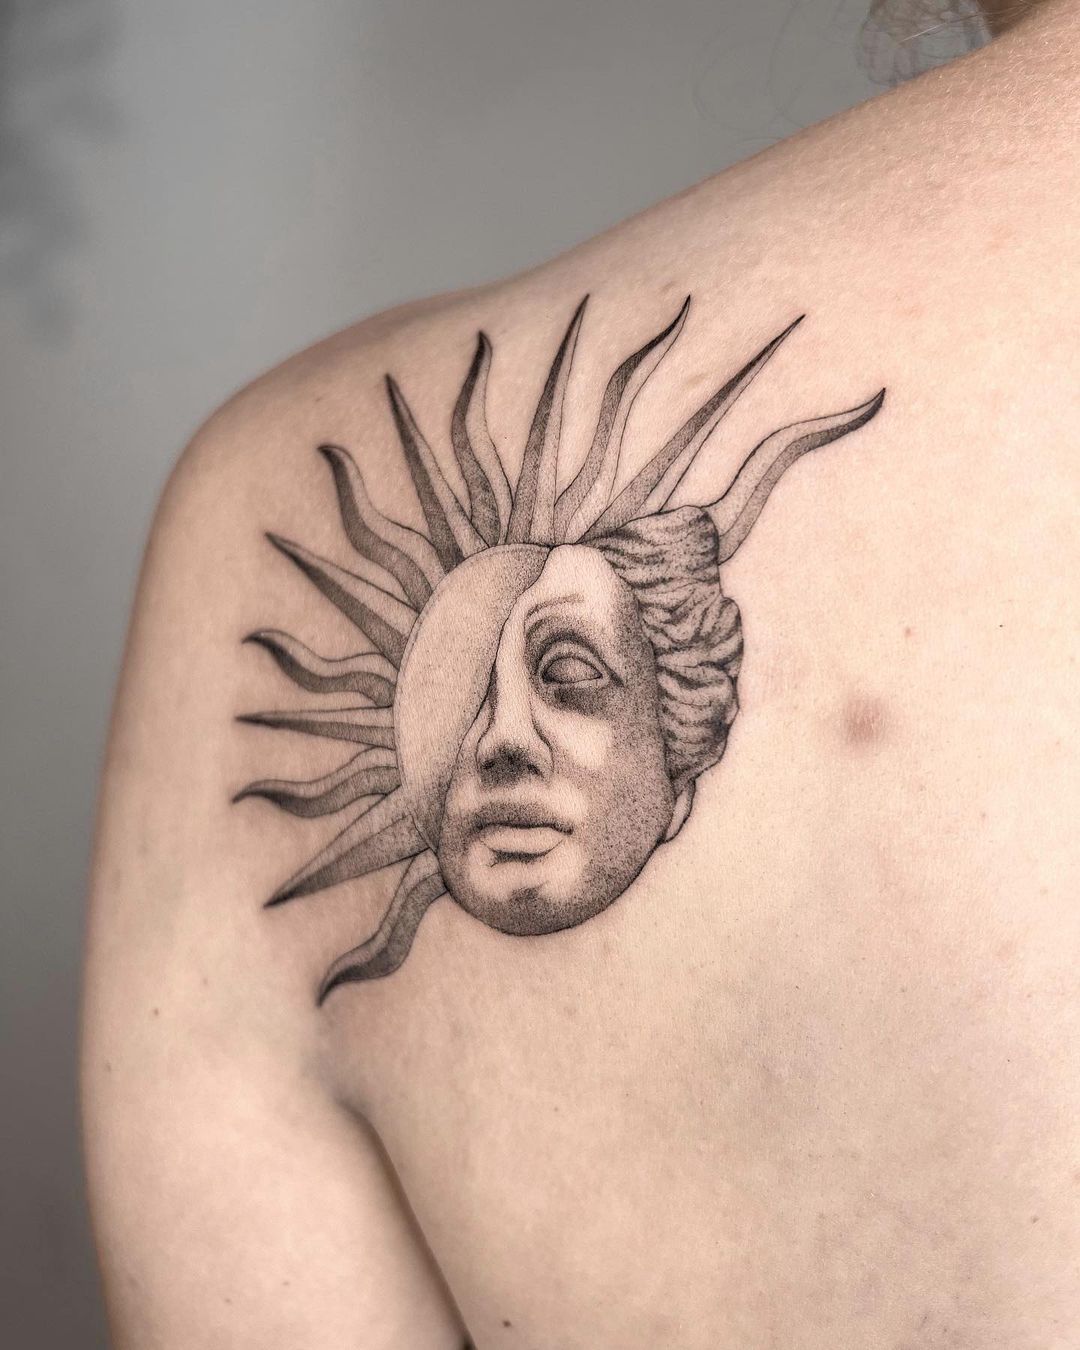 Greek sun inspired by Area87 at Athens Tattoo Studio | Tattoo studio,  Sleeve tattoos, Tattoos